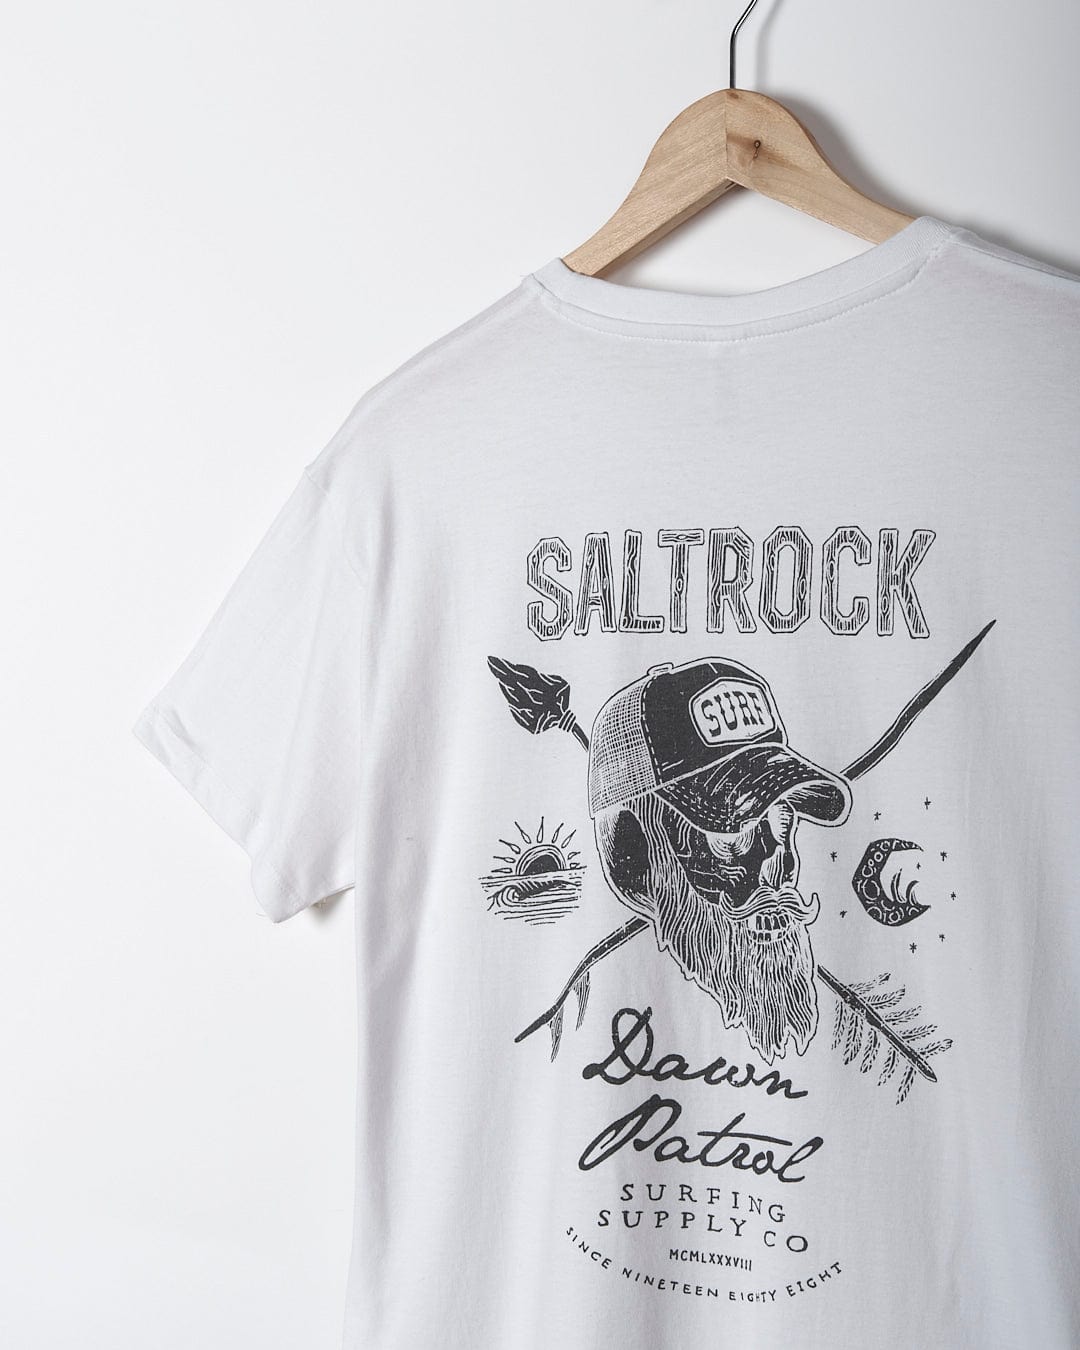 A White Dawn Patrol - Mens Short Sleeve T-Shirt with the words Saltrock on it.